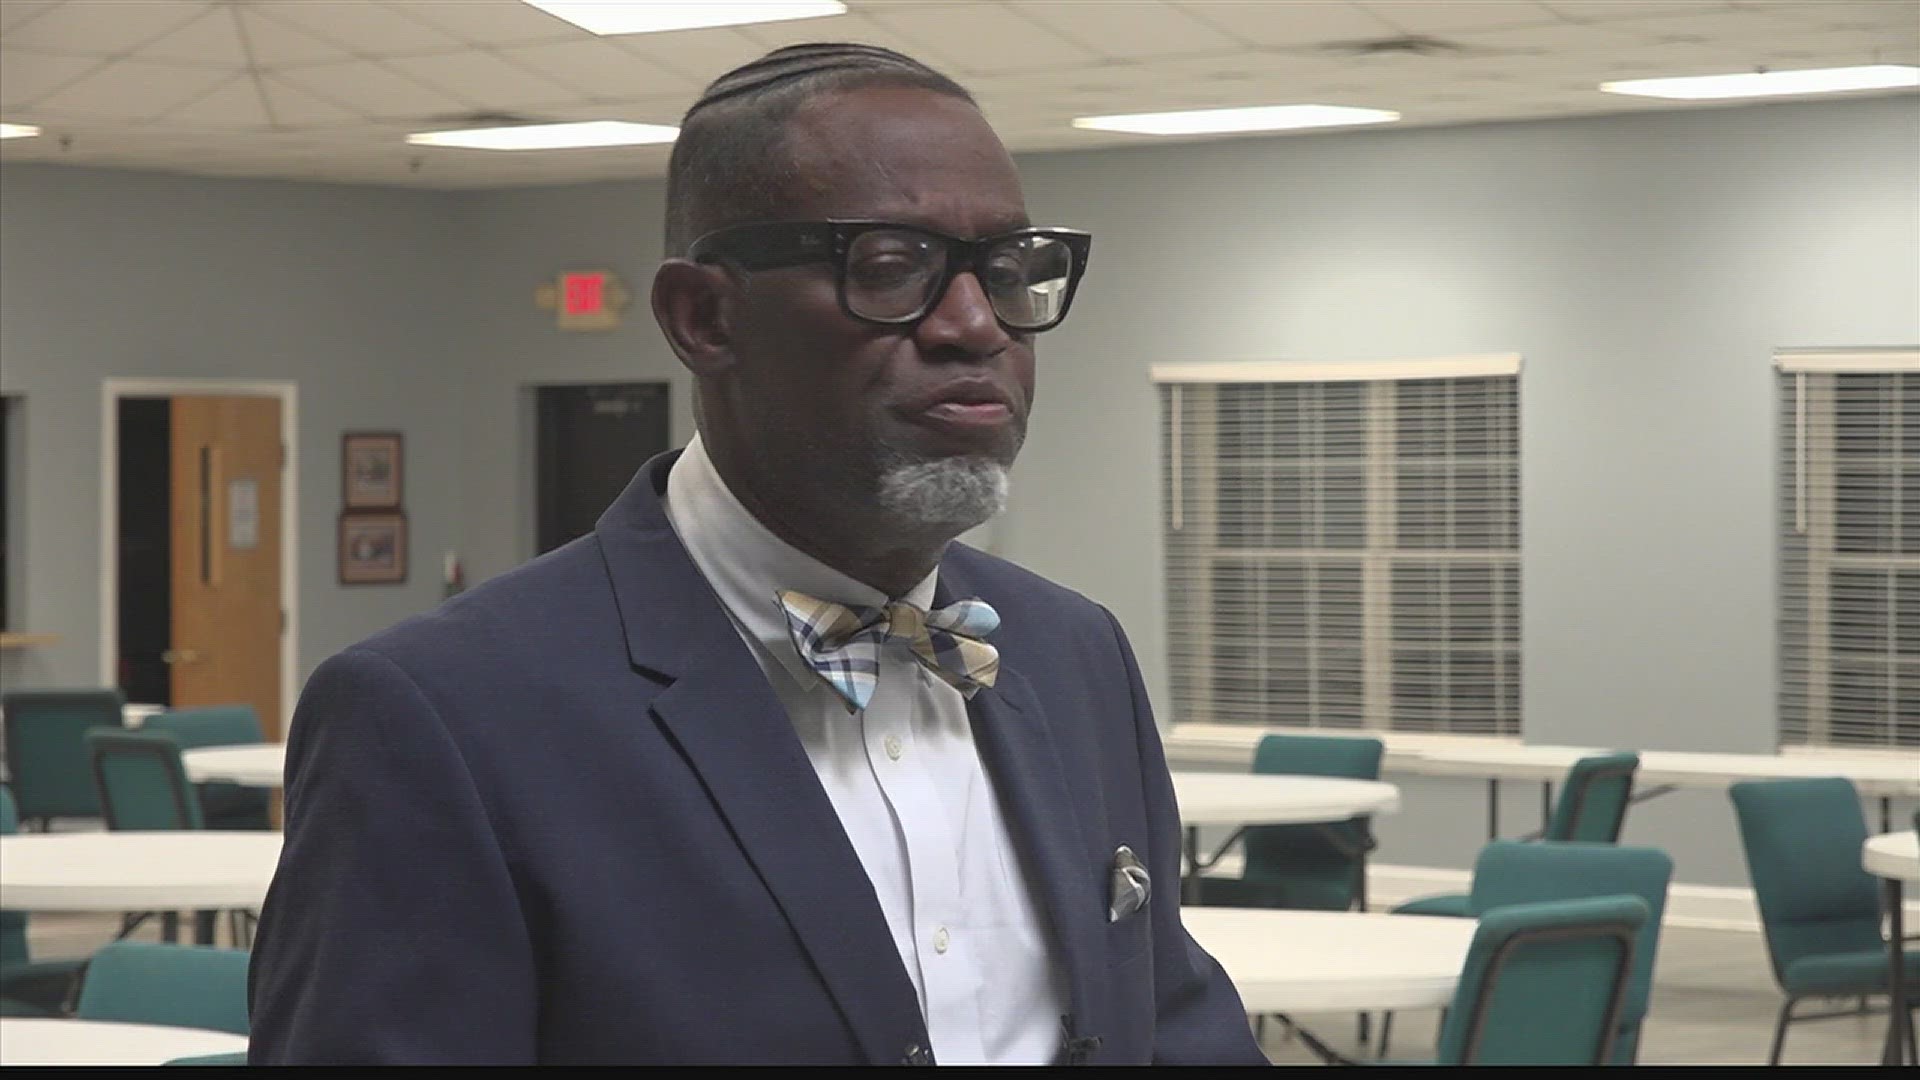 Civil rights leaders and attorneys held a forum in Decatur hours after police officials declared an end to their internal review of an officer-involved shooting.